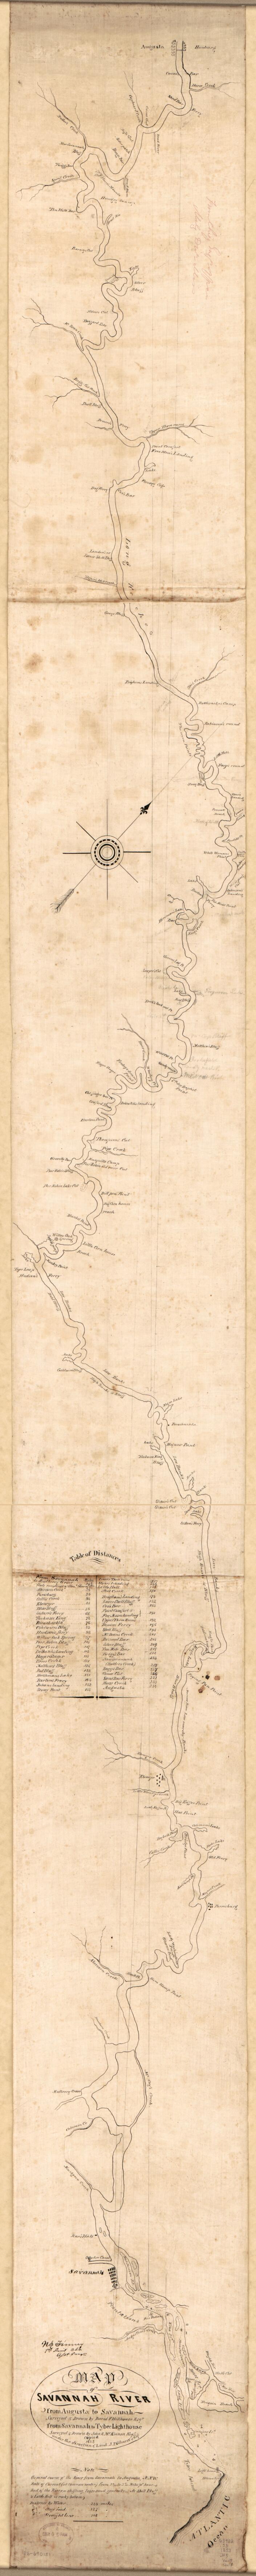 This old map of Map of Savannah River from 1853 was created by N. S. Finney, Jeremy Francis Gilmer, David F. Hillhouse, John R. McKinnon, O. M. (Orlando Metcalfe) Poe in 1853